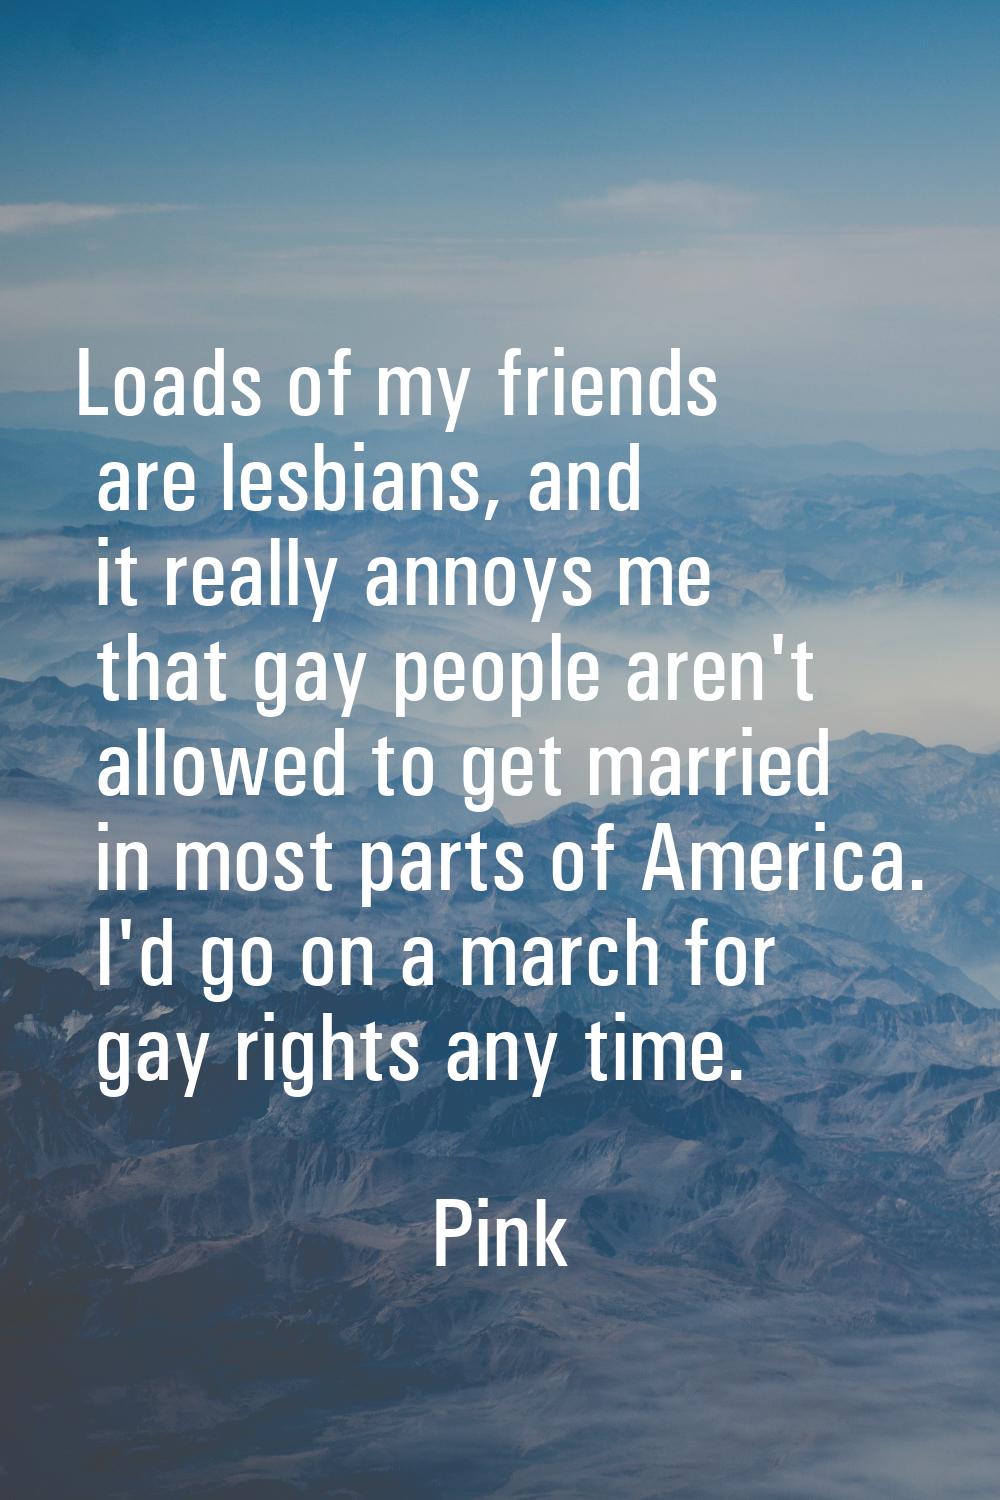 Loads of my friends are lesbians, and it really annoys me that gay people aren't allowed to get mar